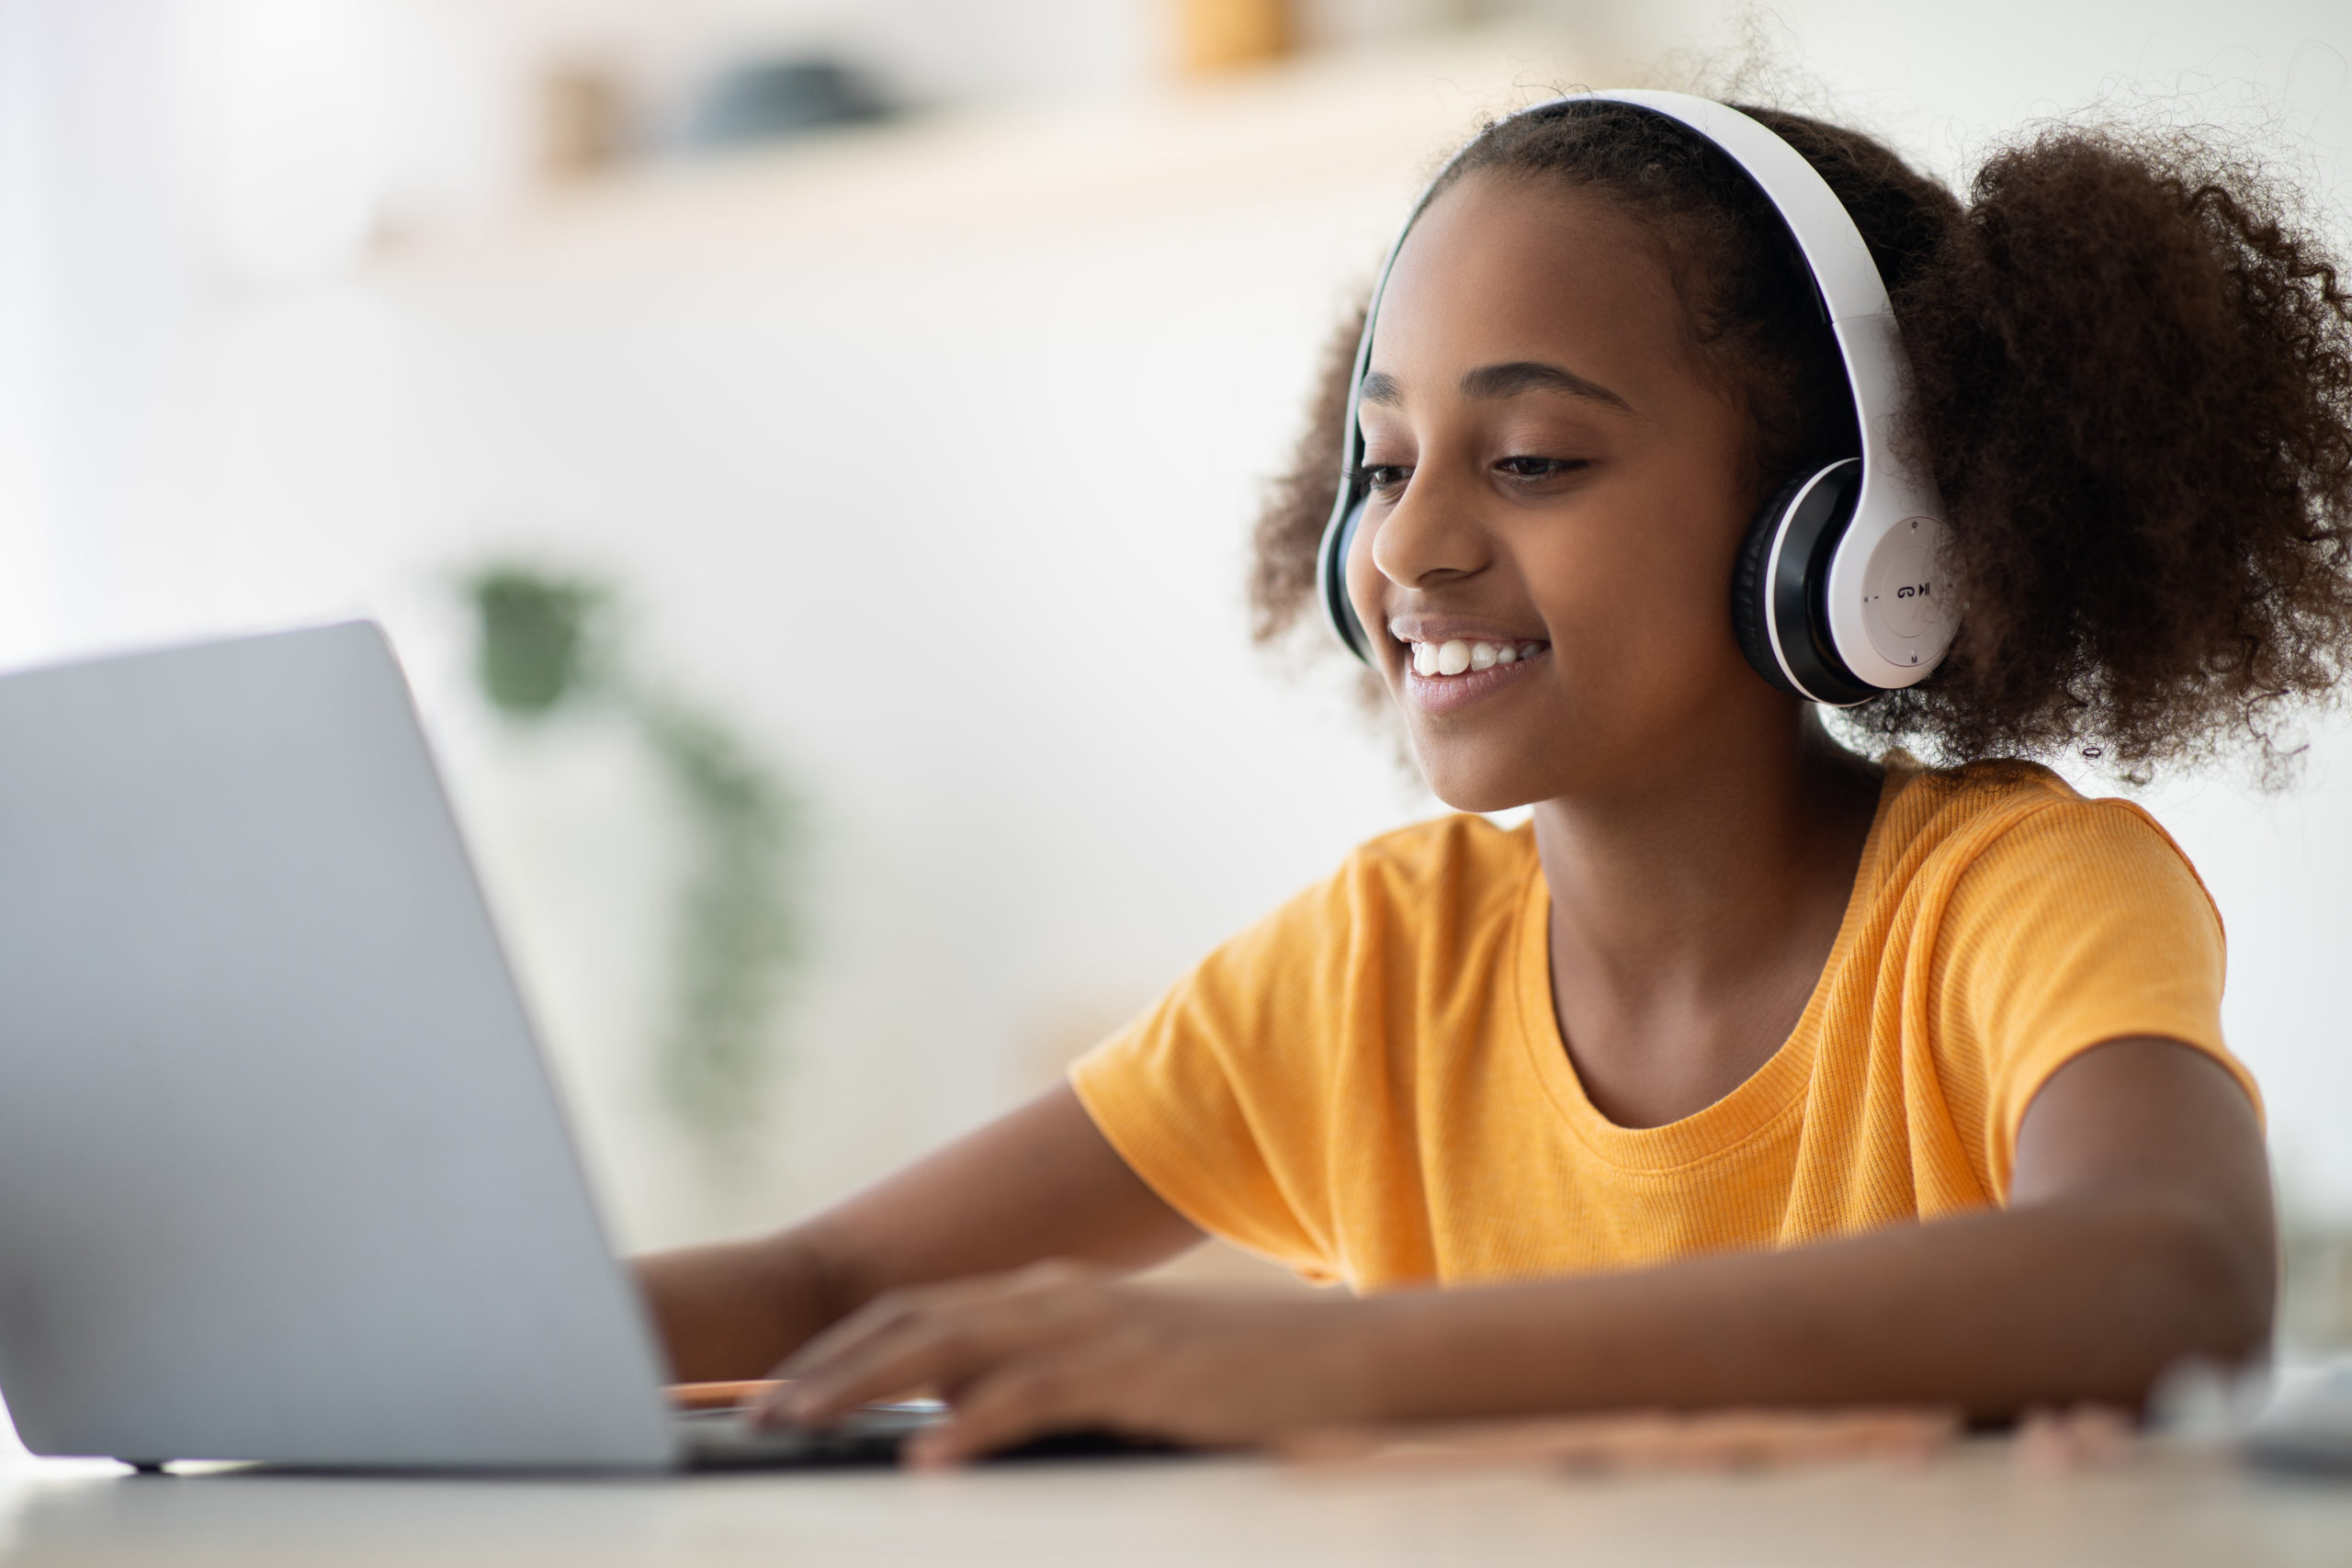 The future of blended learning is feature-rich and personalized, allowing a far better experience than could ever be offered in the traditional classroom setting